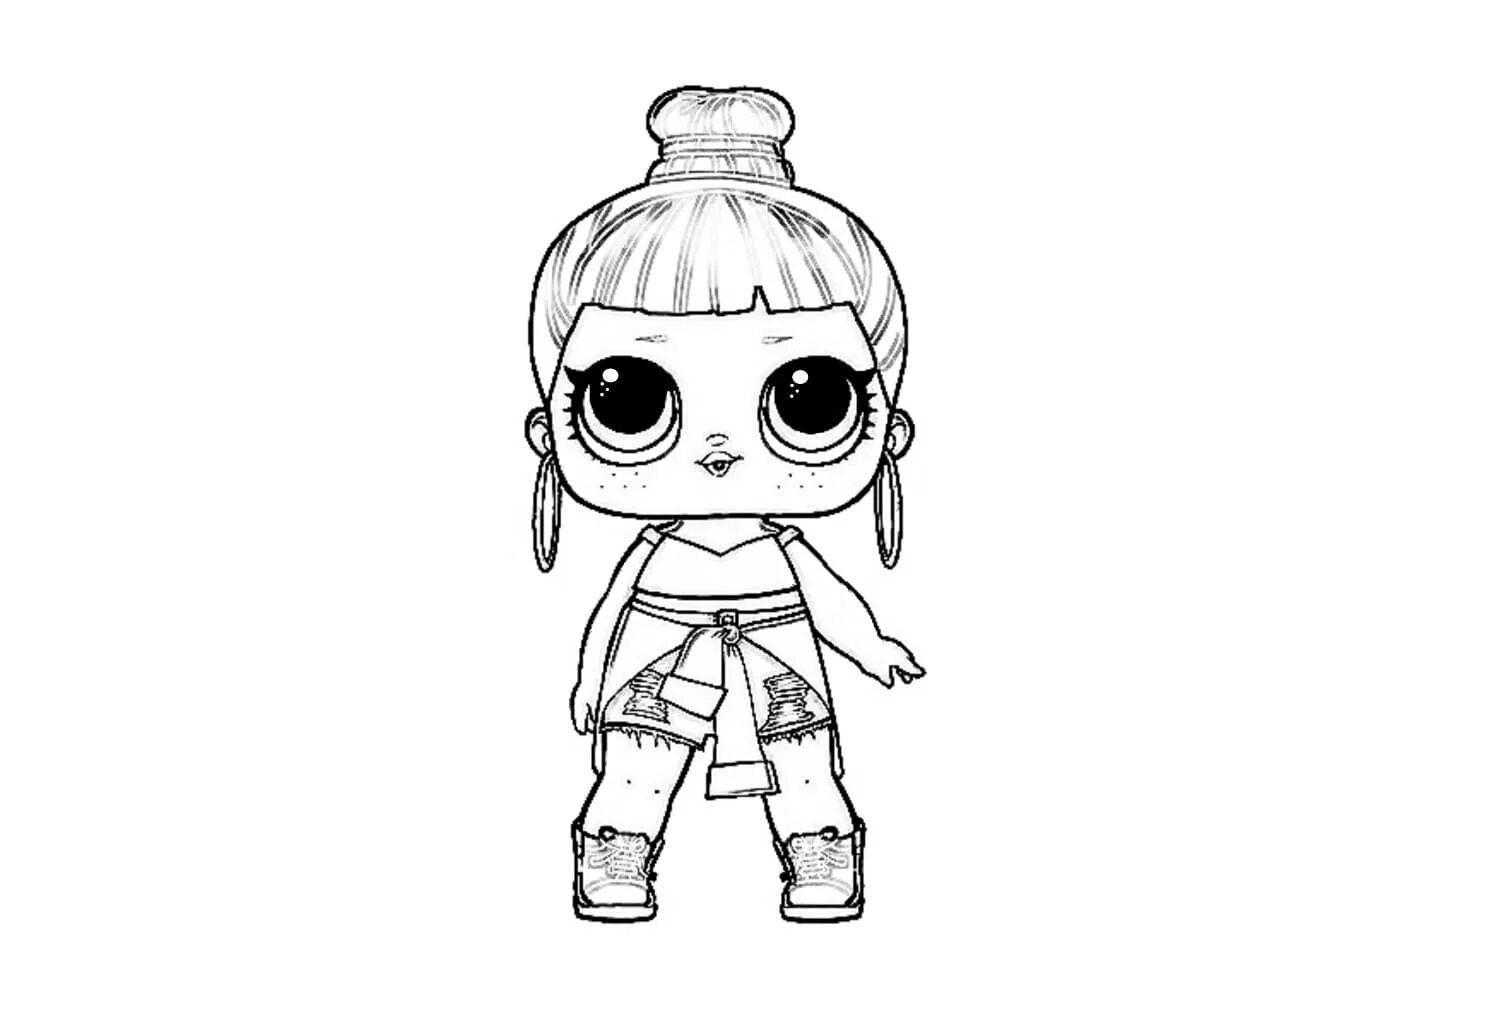 Exciting lol doll sketch